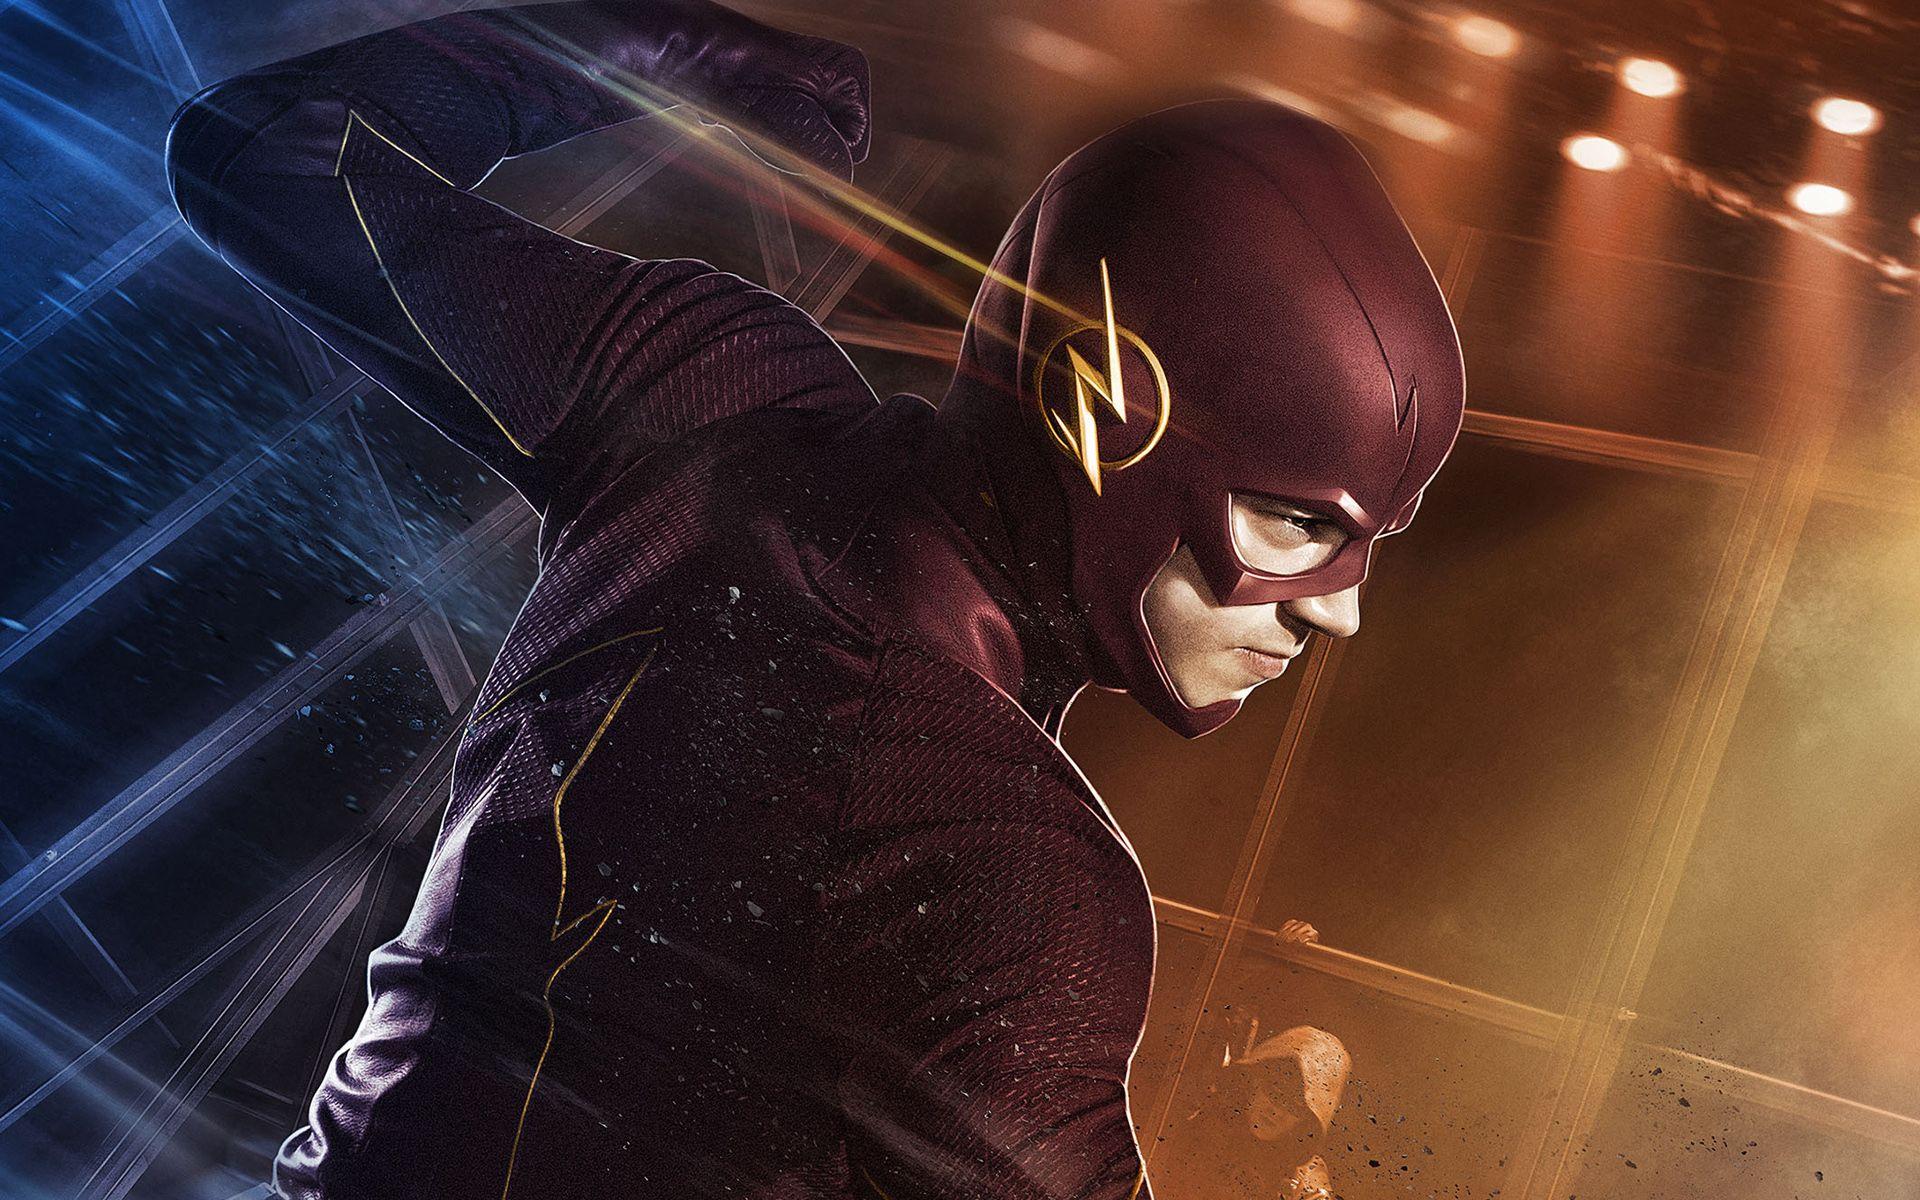 The Flash (CW) image The Flash HD wallpaper and background photo